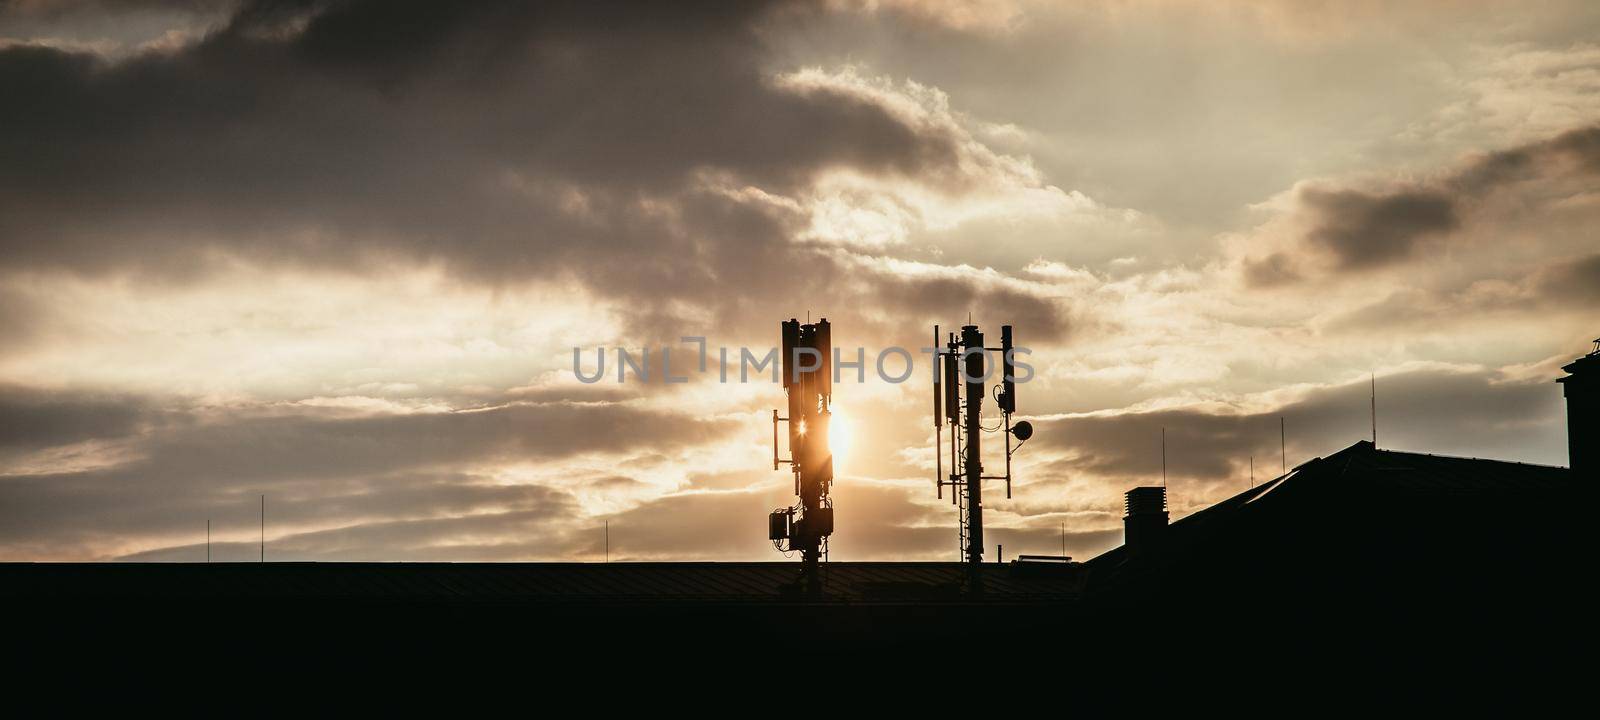 5g and communication tower: Silhouette of communication tower on rooftop, evening by Daxenbichler